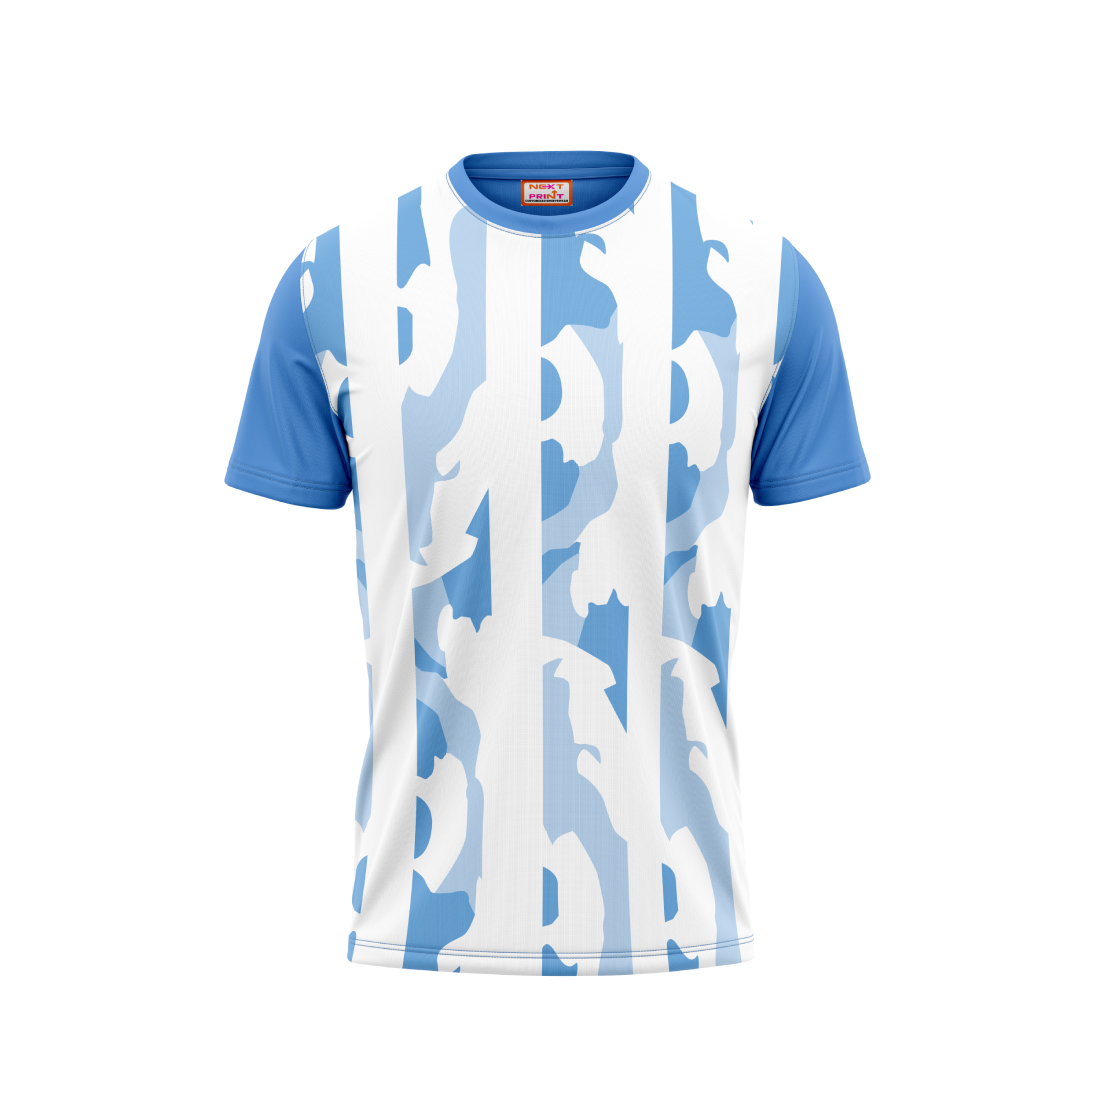 Round Neck Printed Jersey Skyblue NP5000021